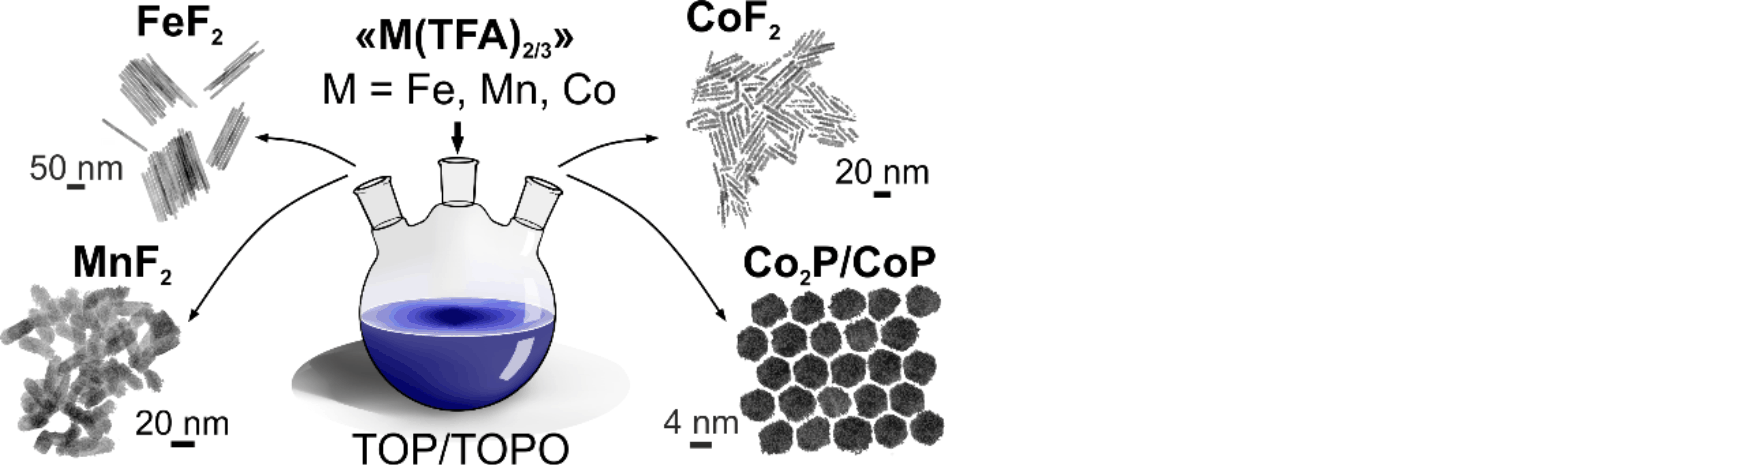 Transition metal trifluoroacetates (M = Fe, Co, Mn) as precursors for uniform colloidal metal difluoride and phosphide nanoparticles